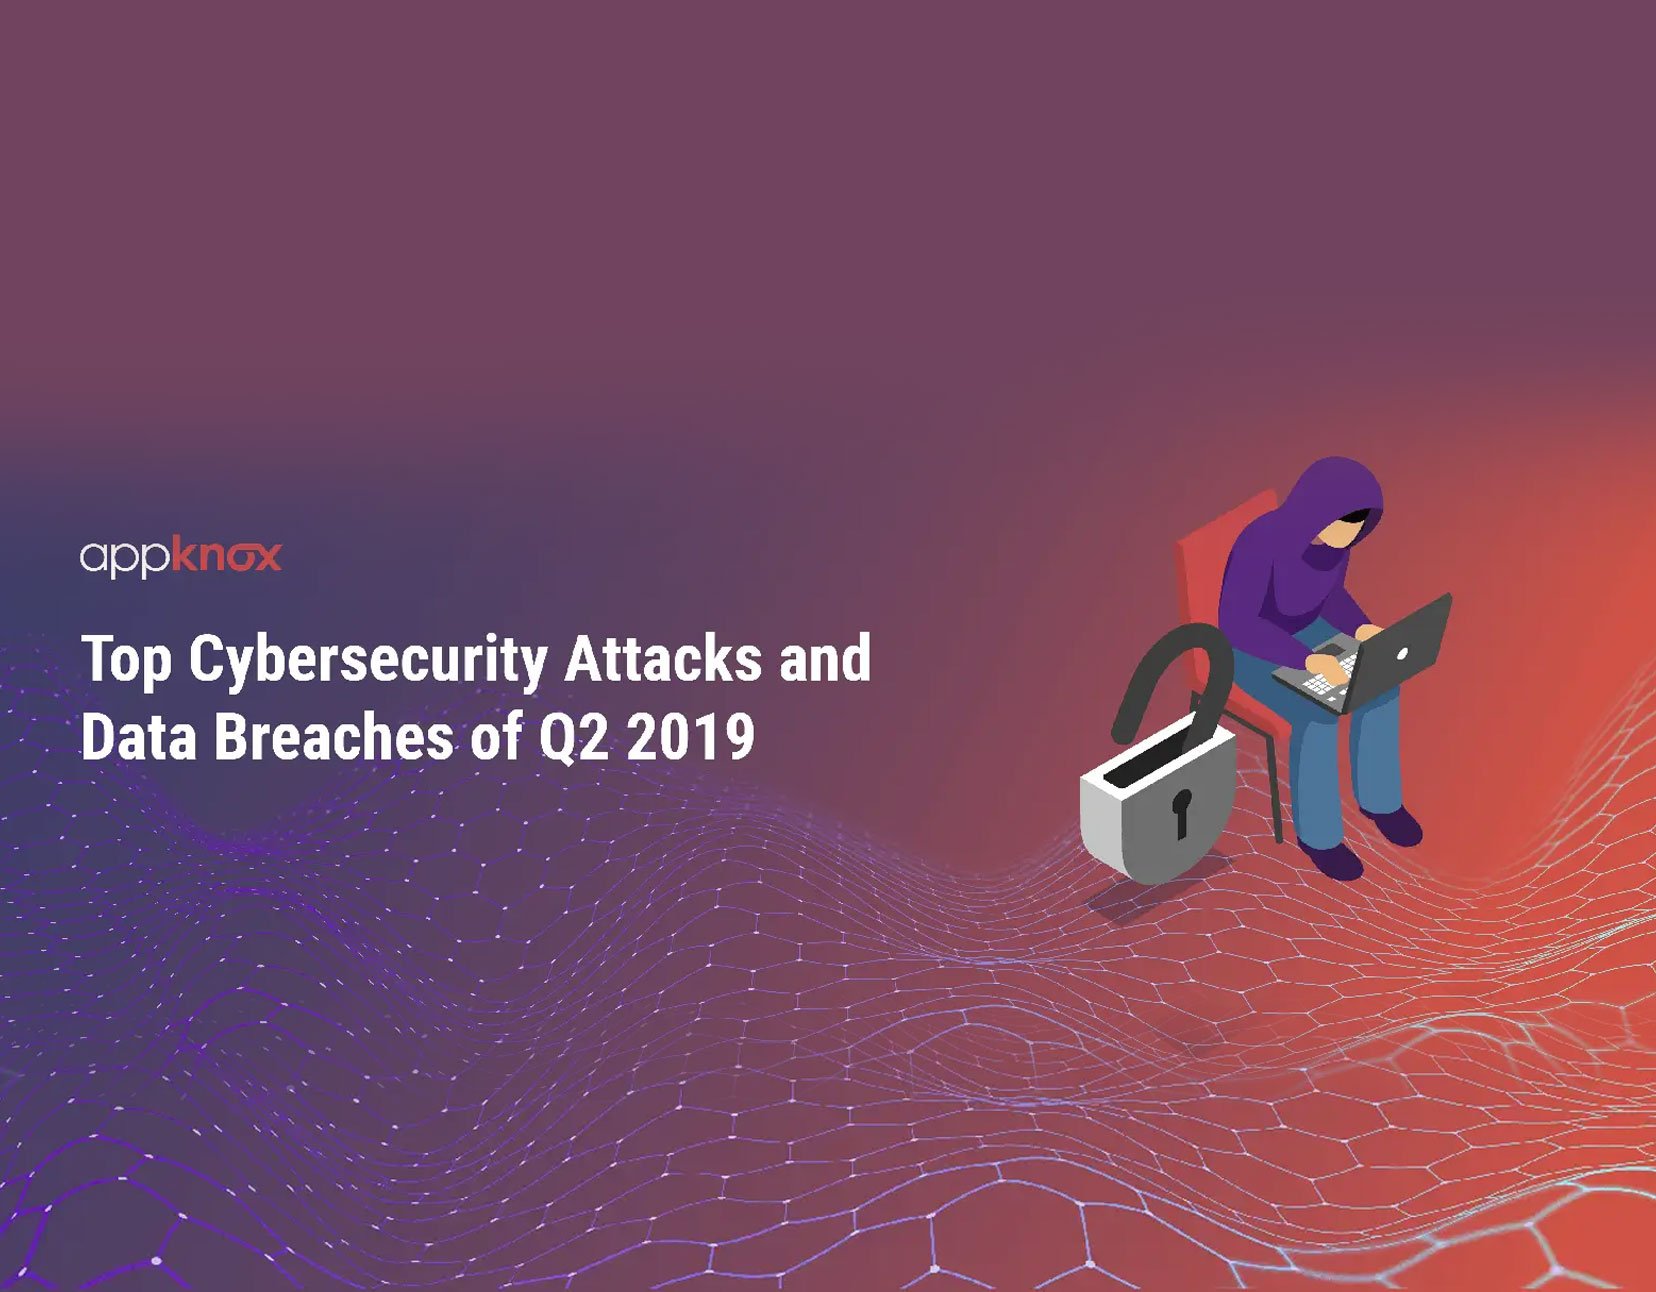 Top Cybersecurity Attacks and Data Breaches of Q2 2019